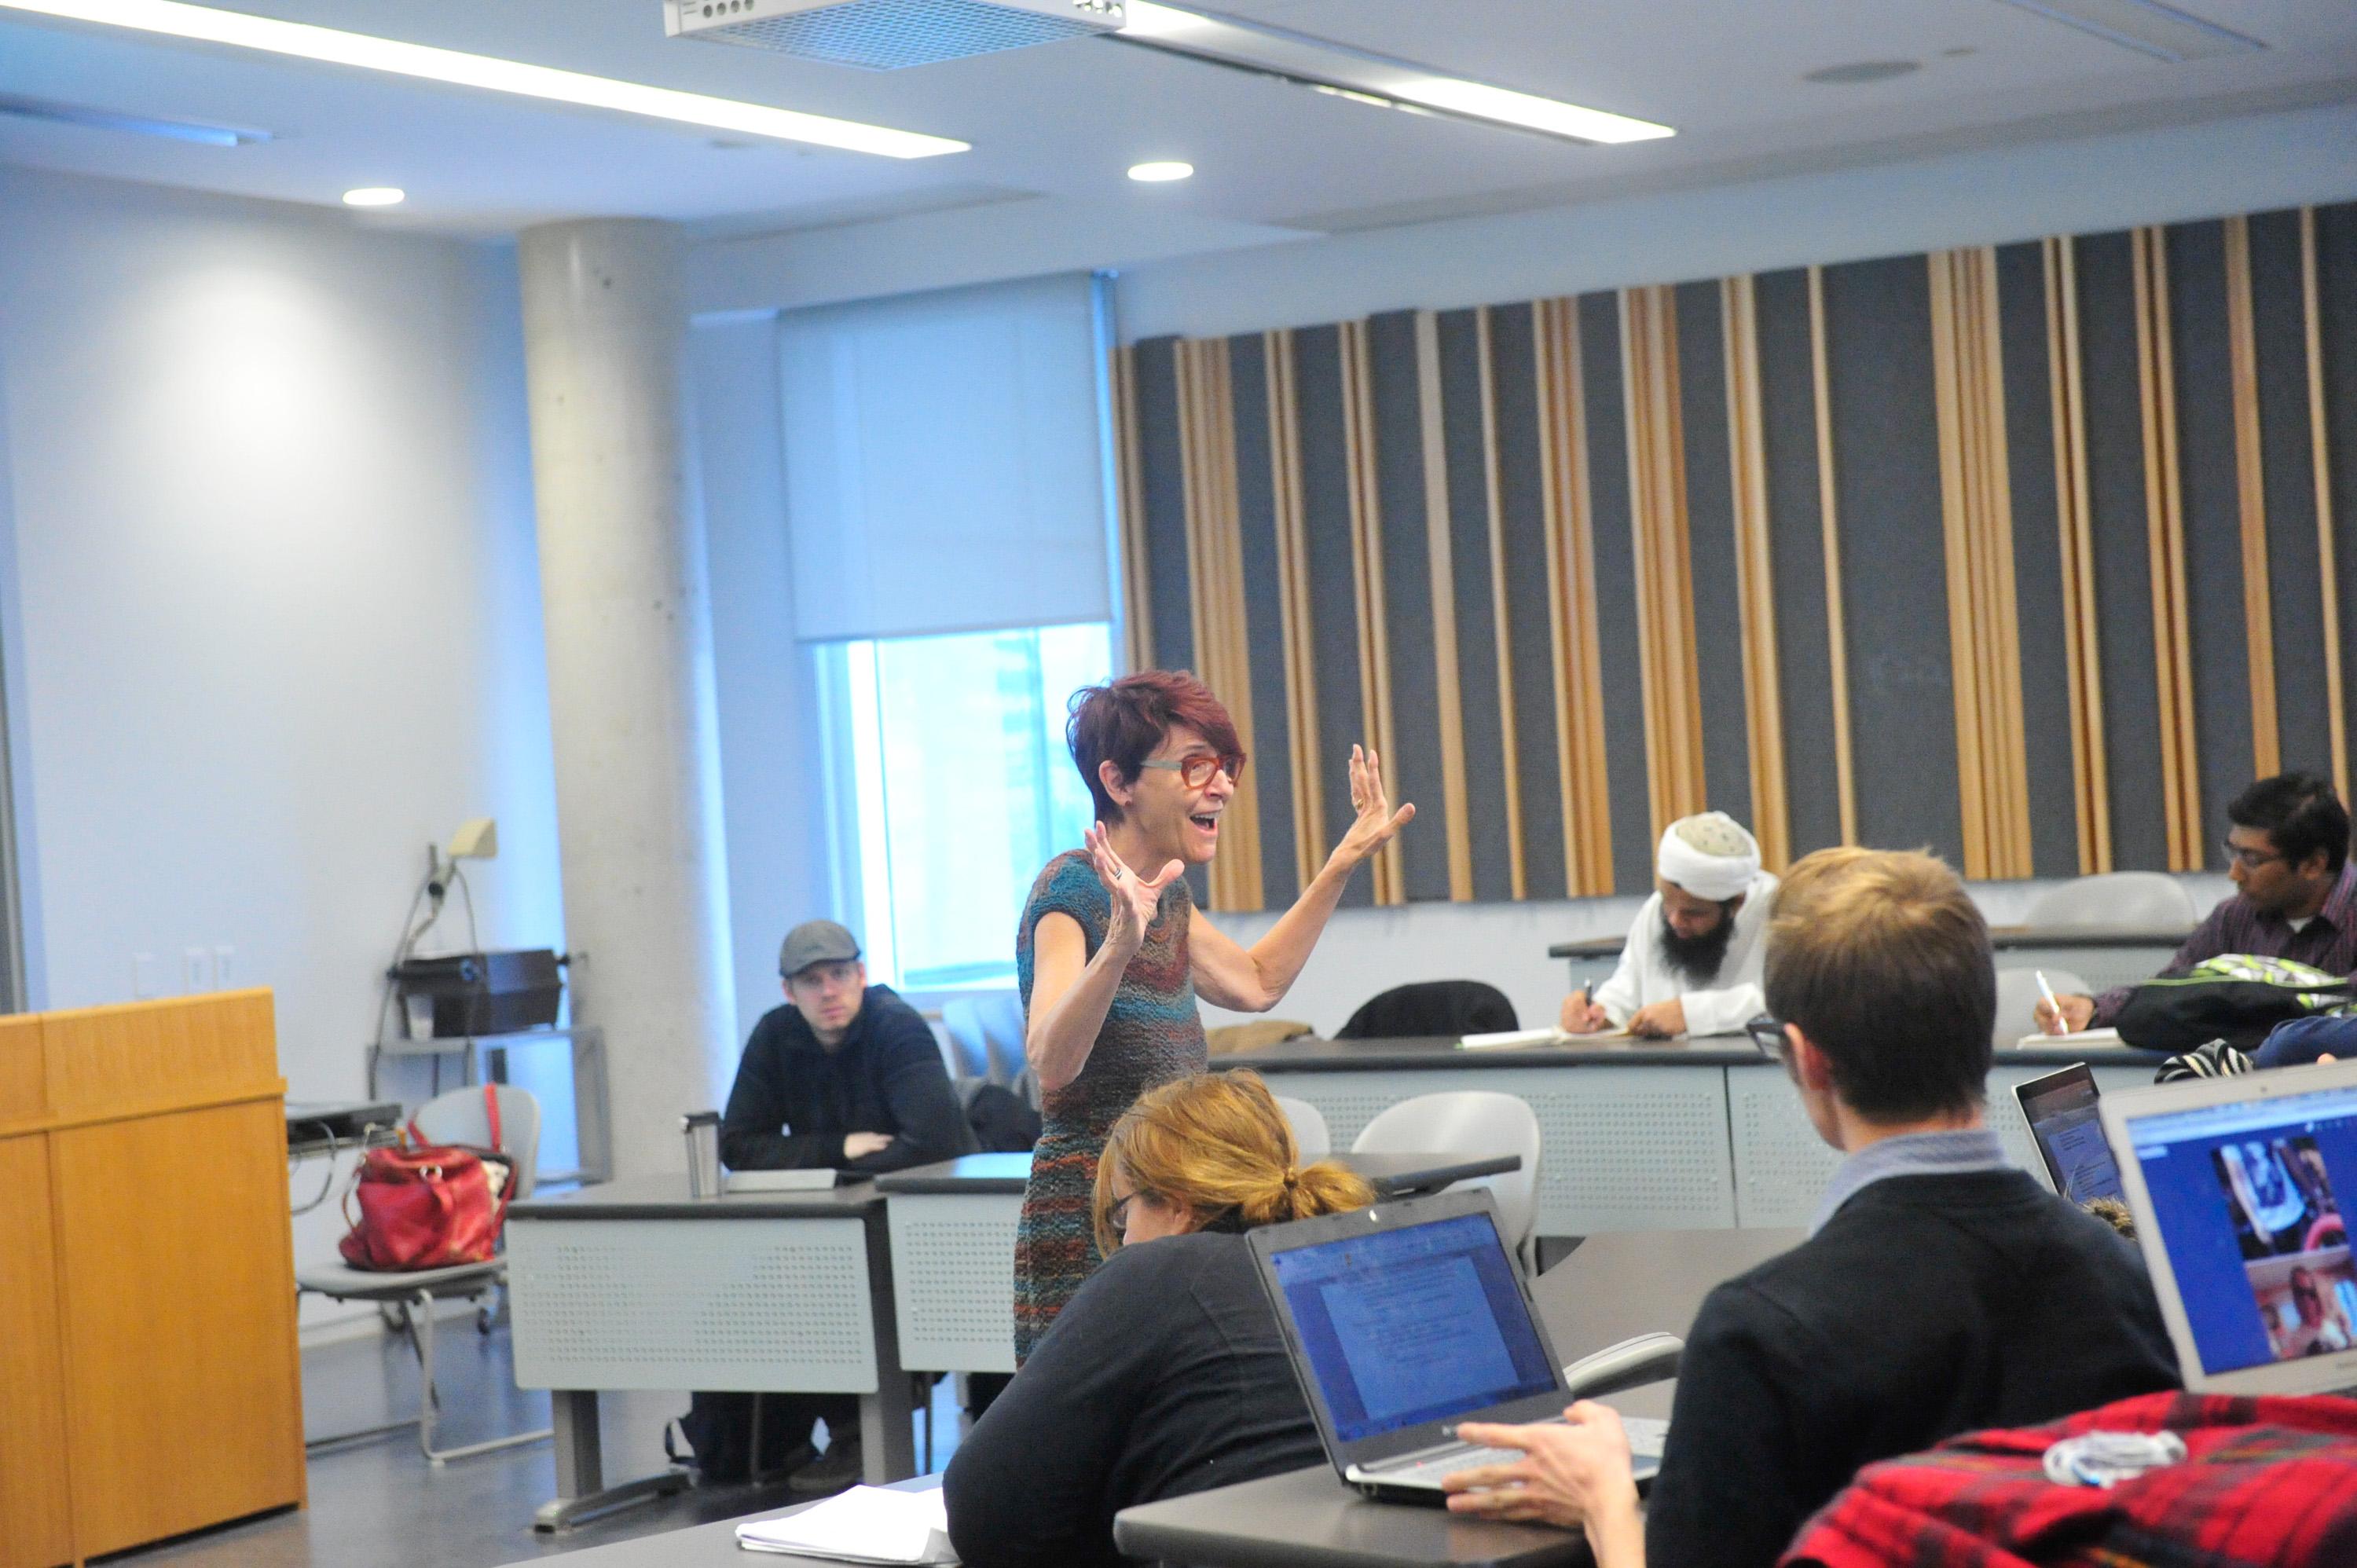 Professor Donna Gabaccia, very animated, lecturing to a class.